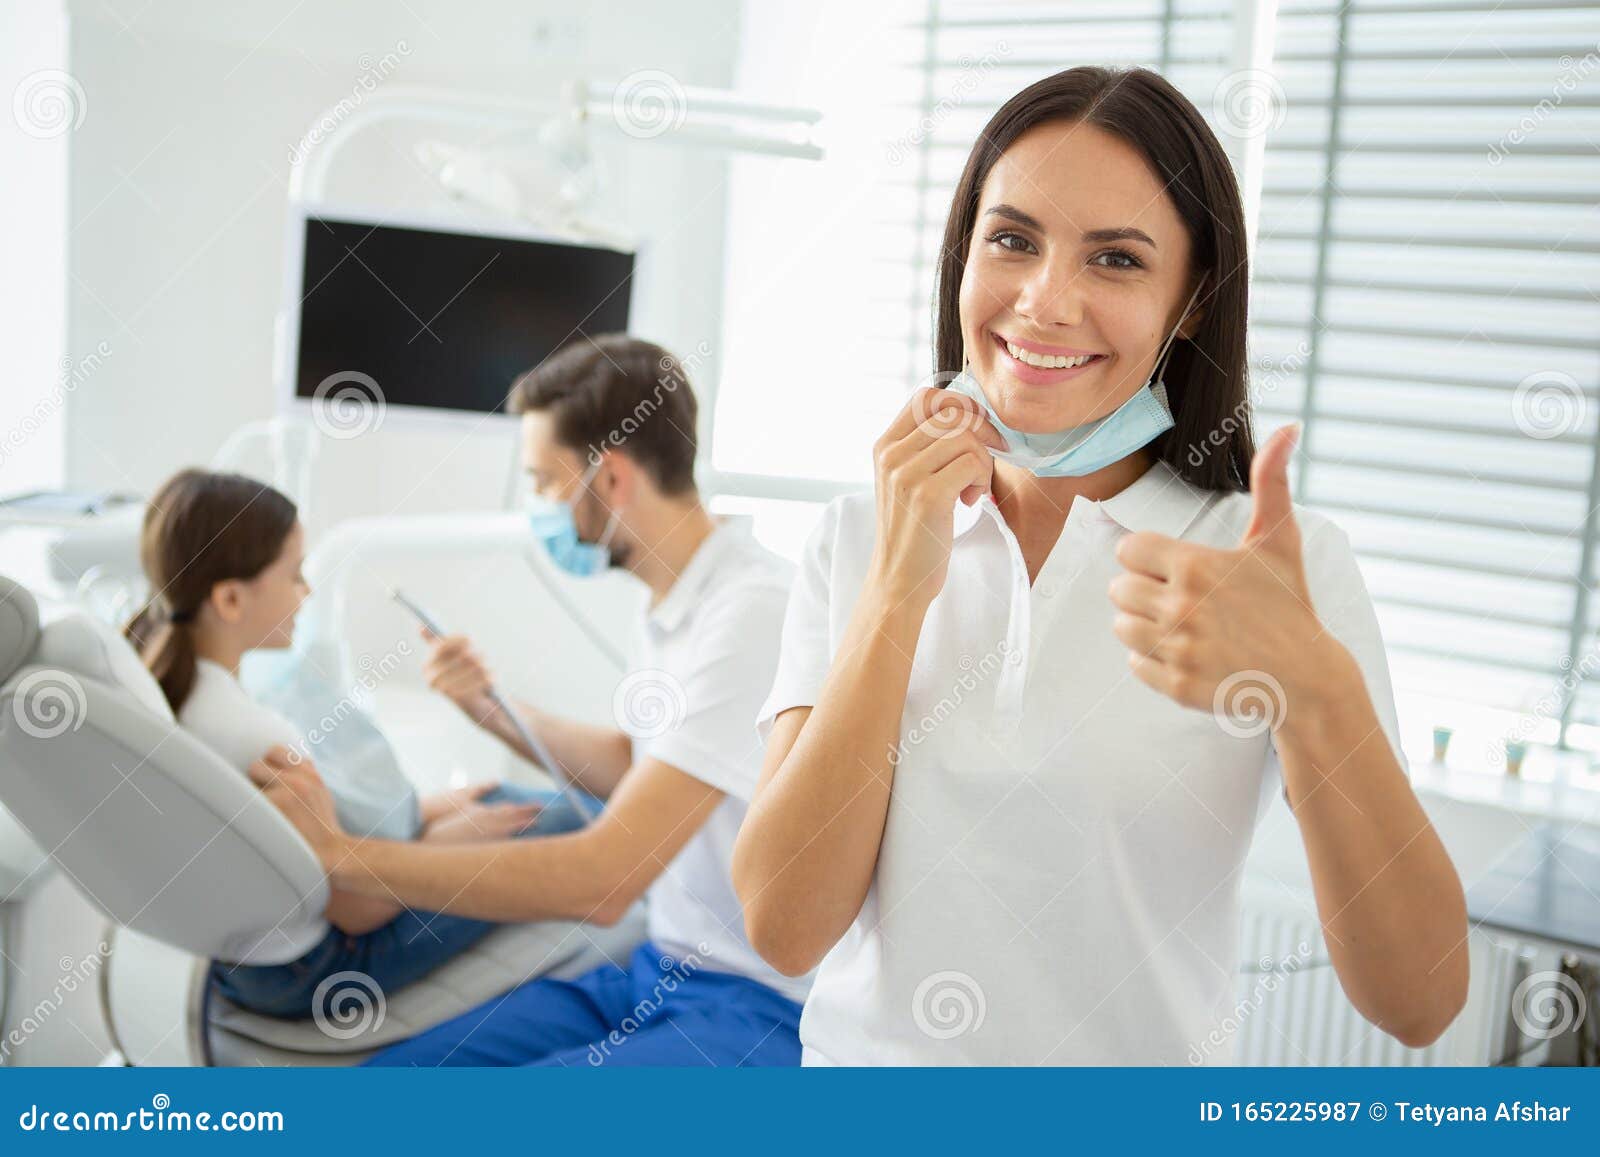 portrait of female dentist showing thumb up while her collegue working with small client on the background